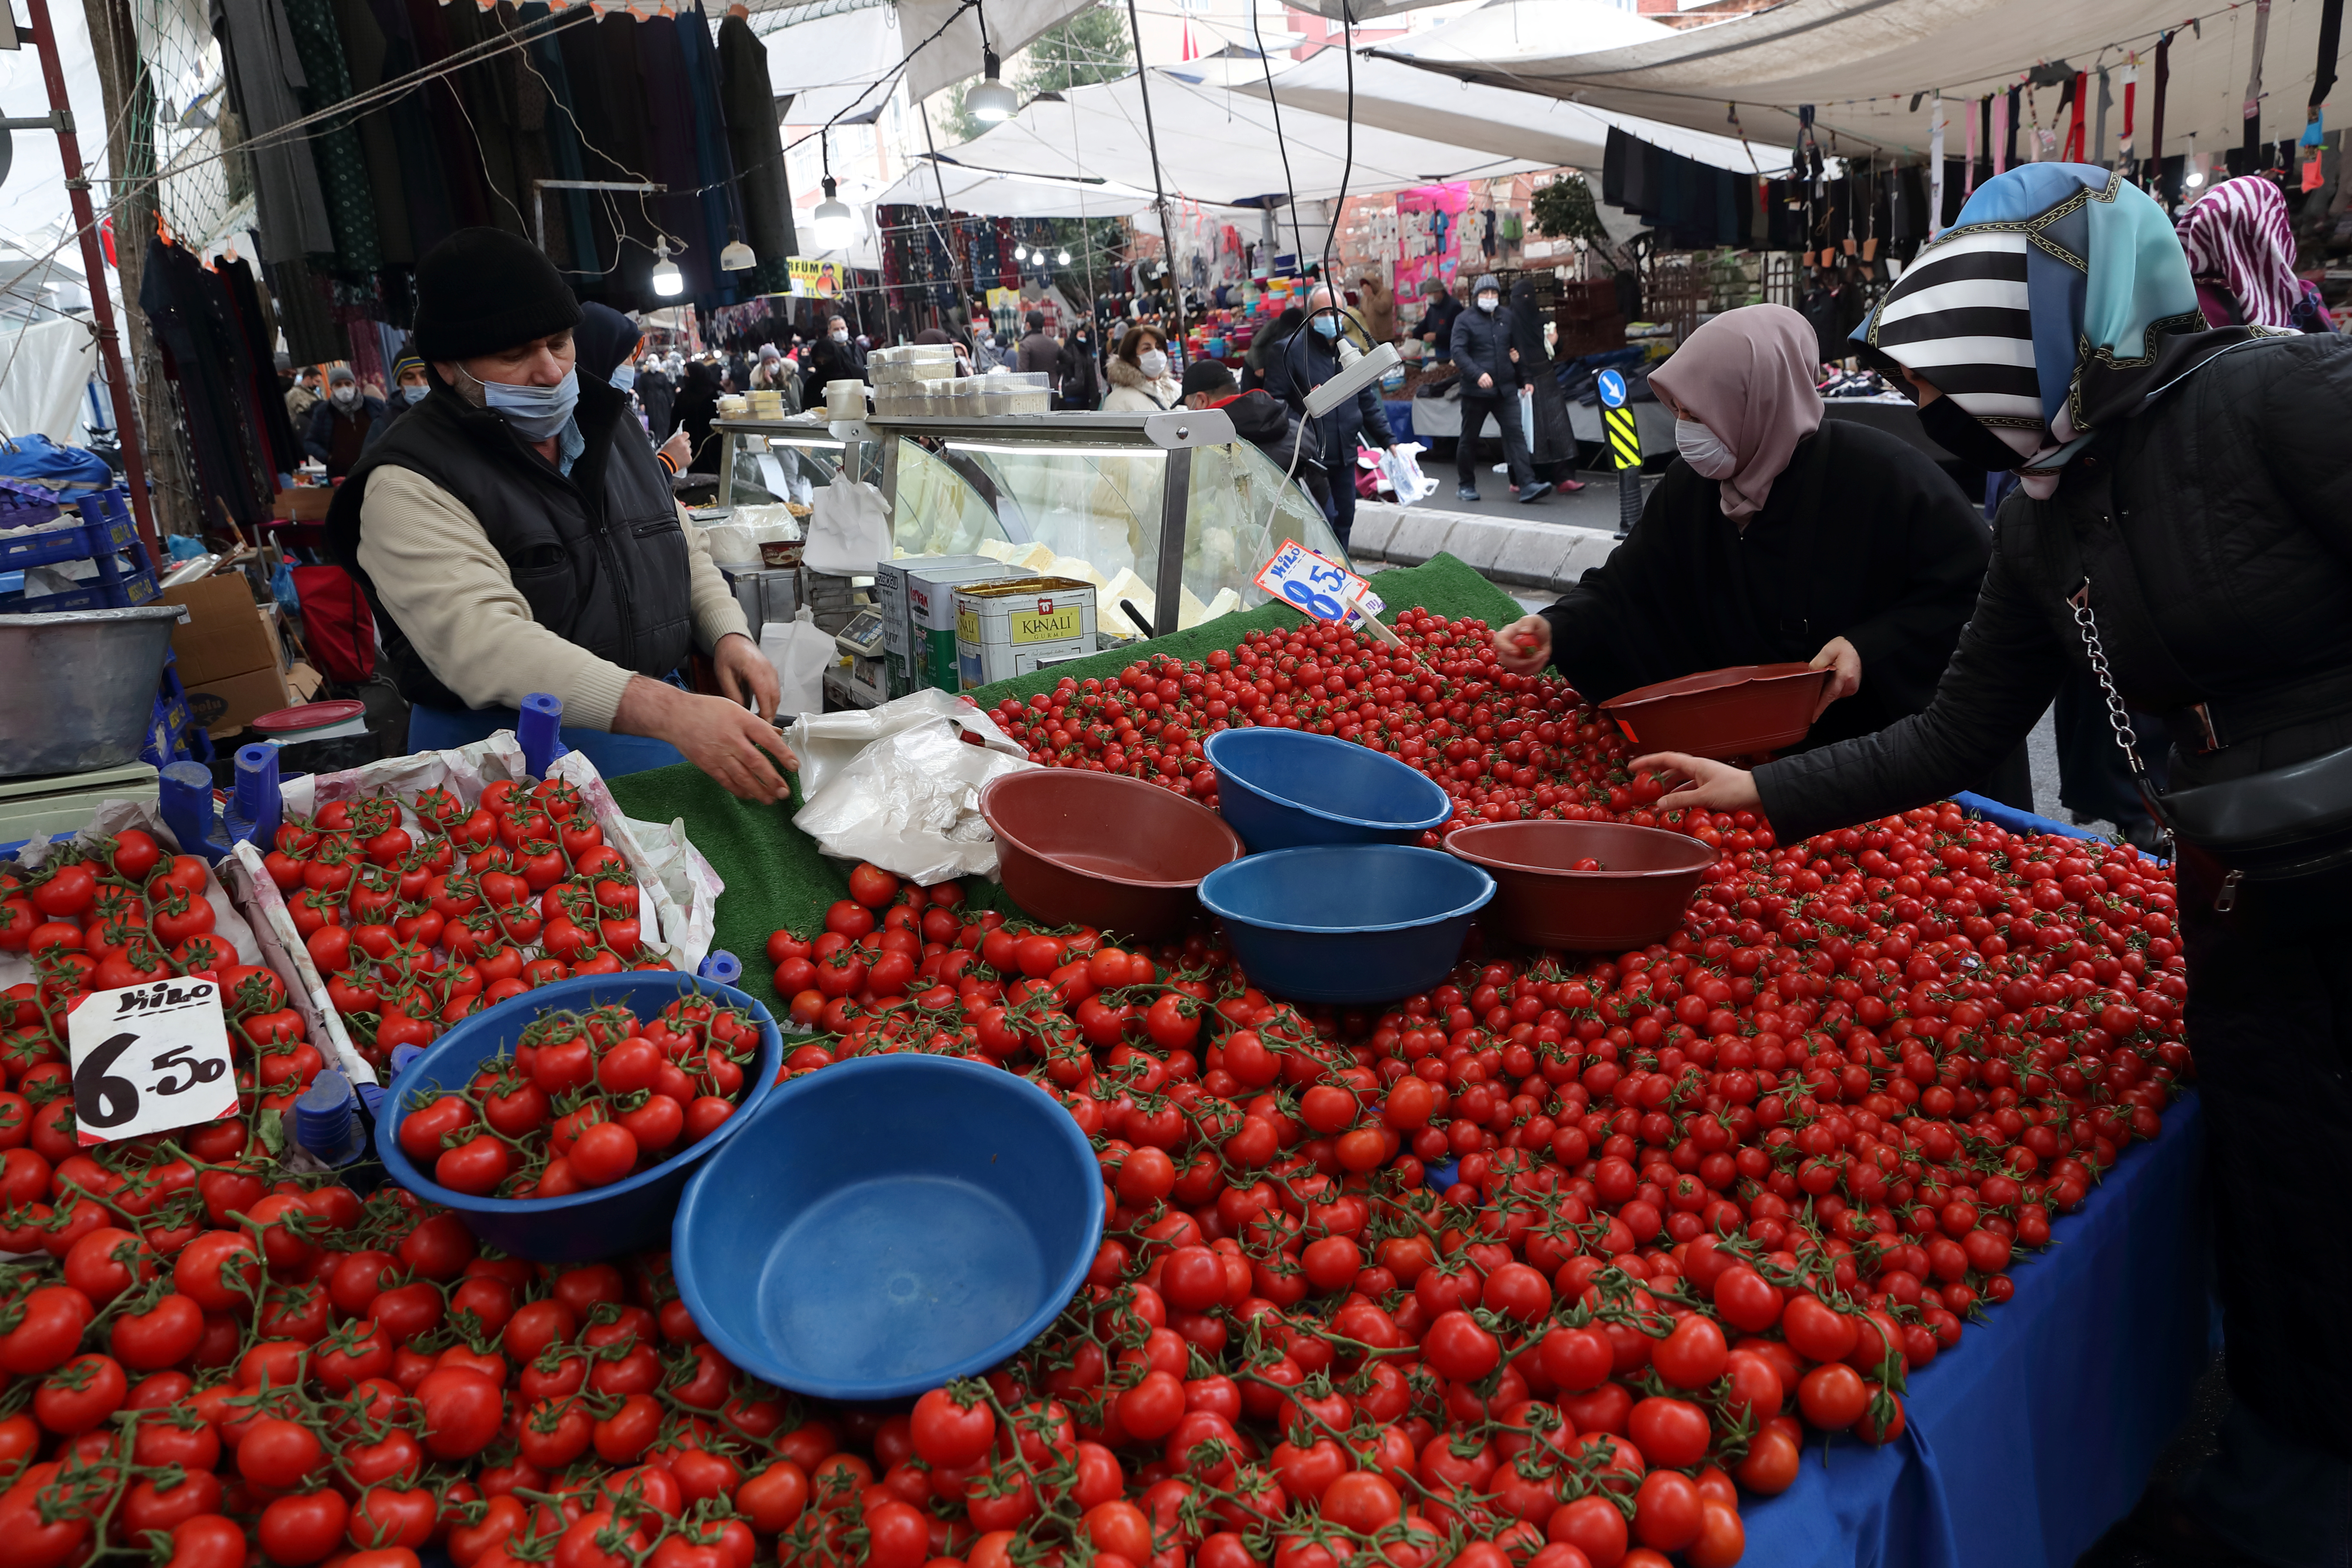 Women shop at a local market in Fatih district in Istanbul